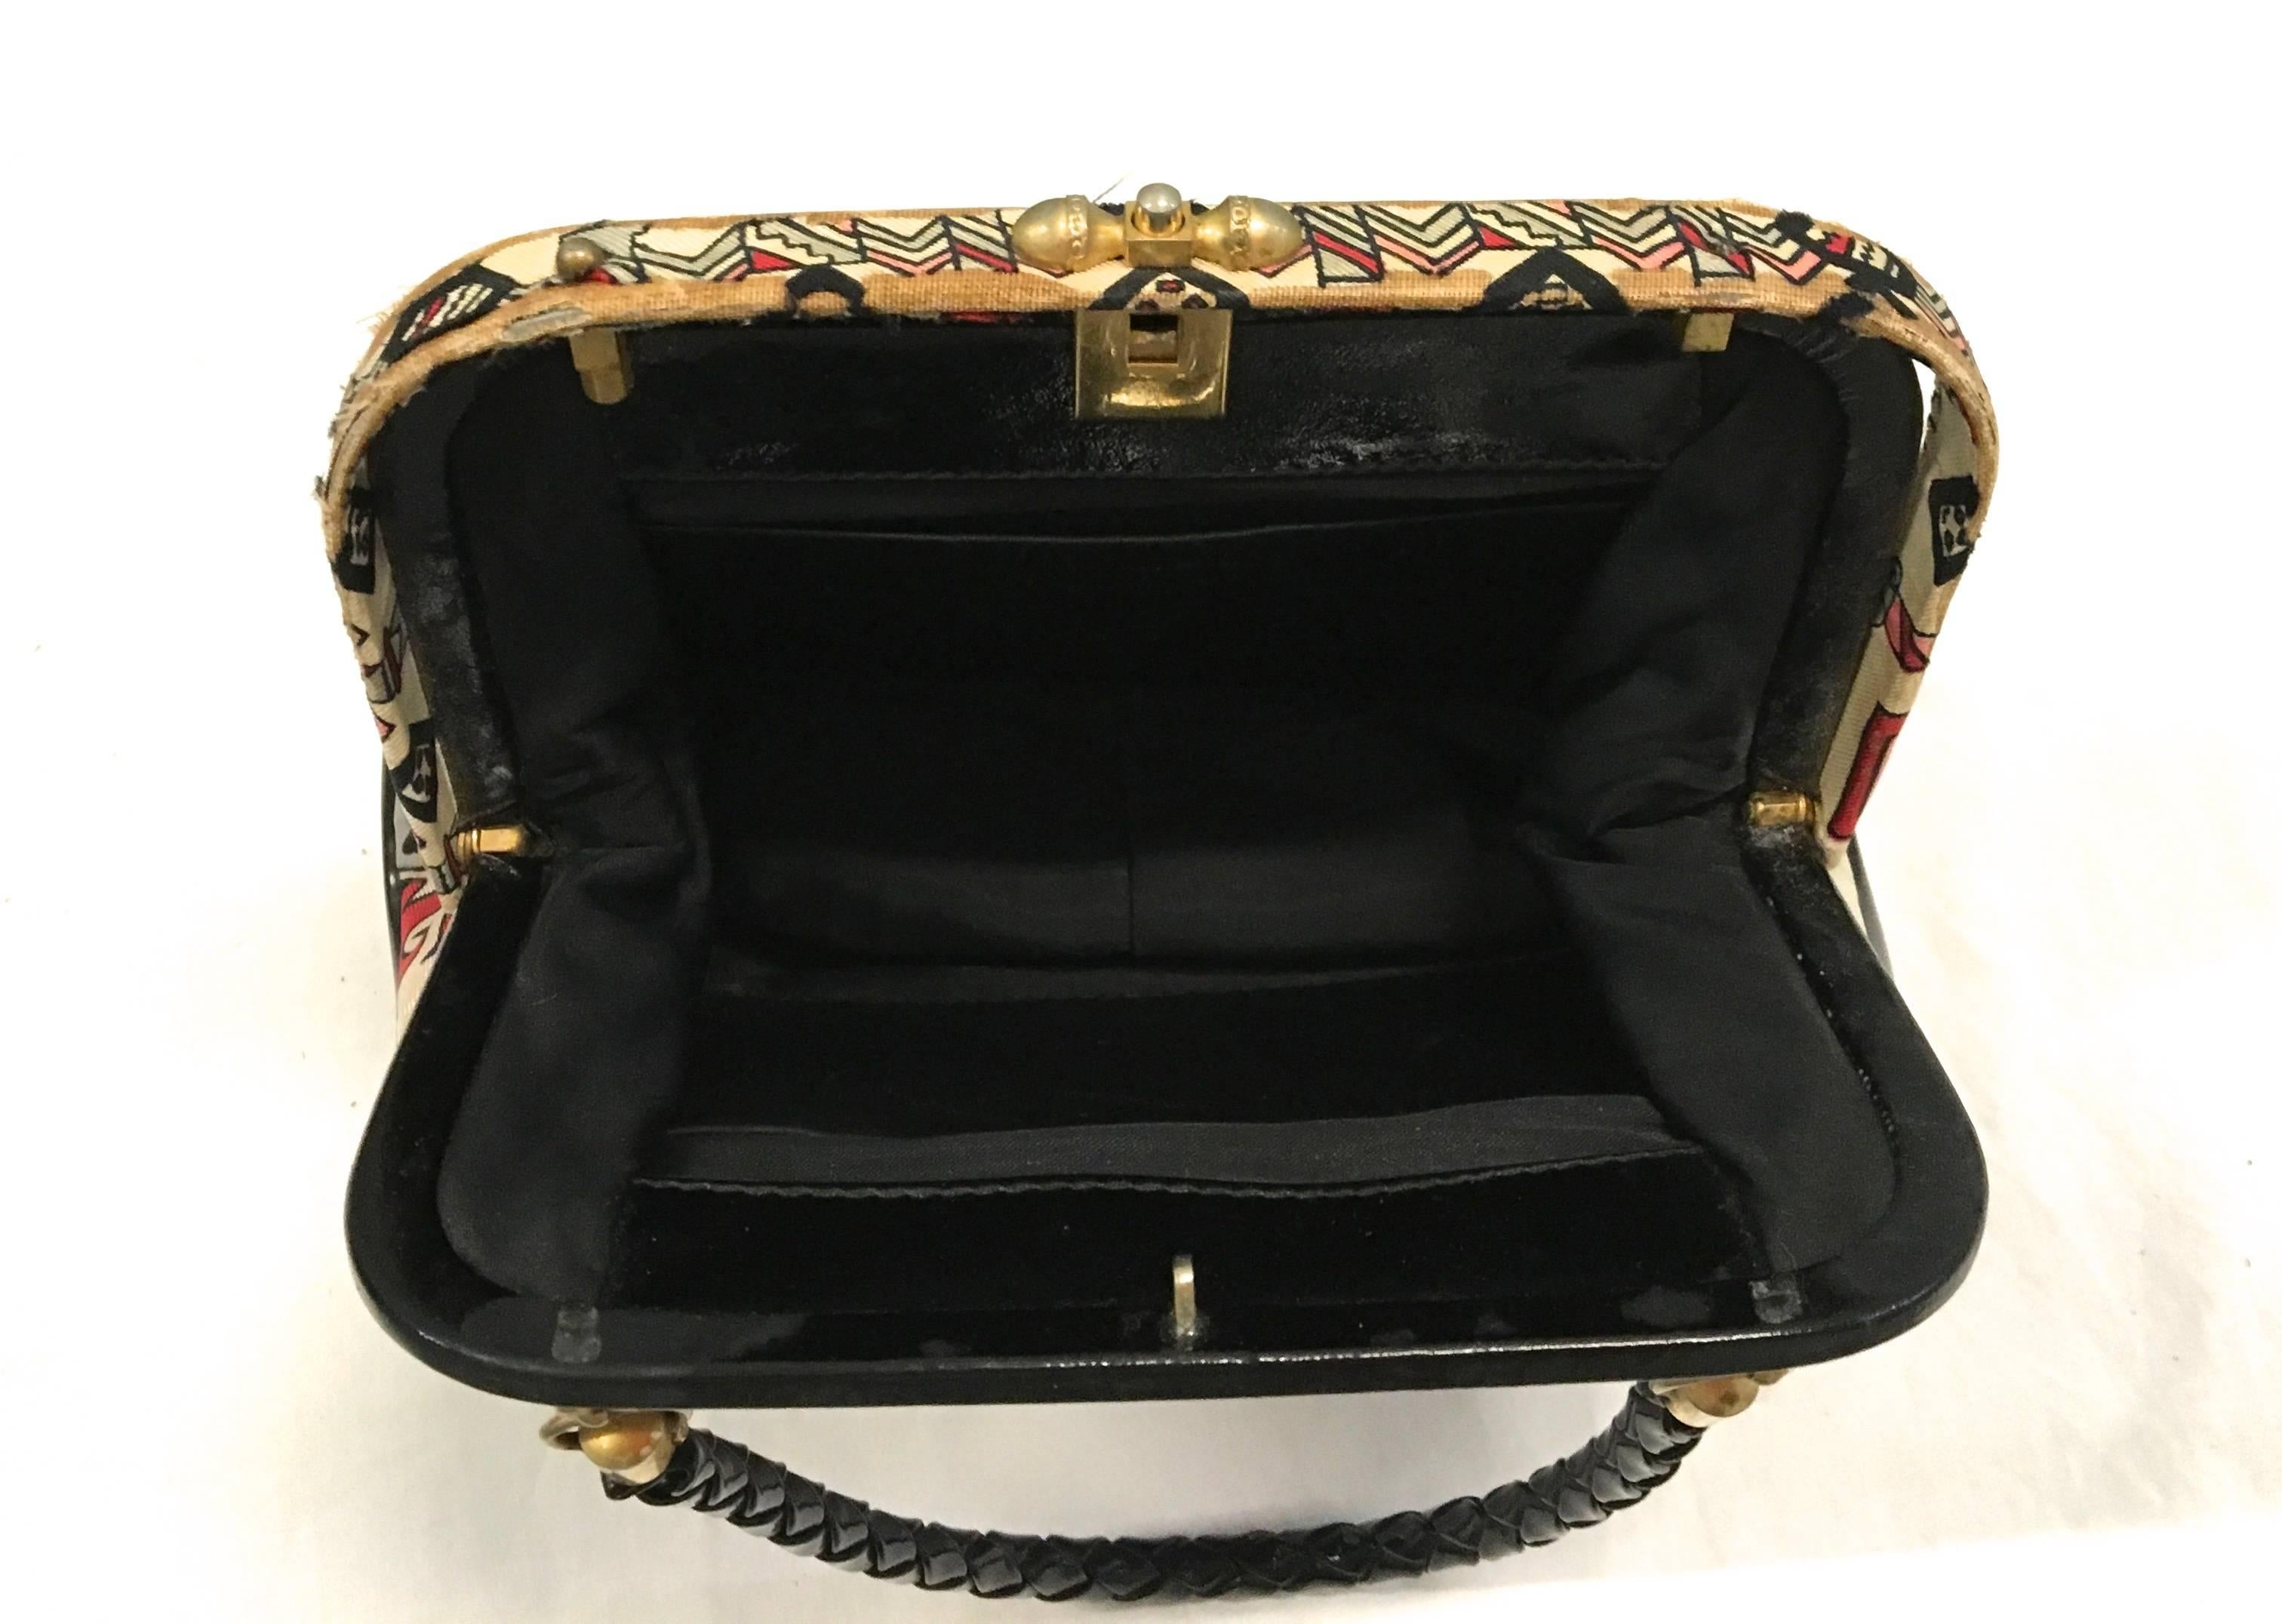 Presented here is a purse from Emilio Pucci. This vintage purse is from the 1960's and is comprised of colors of tones of gray, black, red, cream and white. The bag is trimmed in black with a black handle and gold tone metal hardware. The bag is in